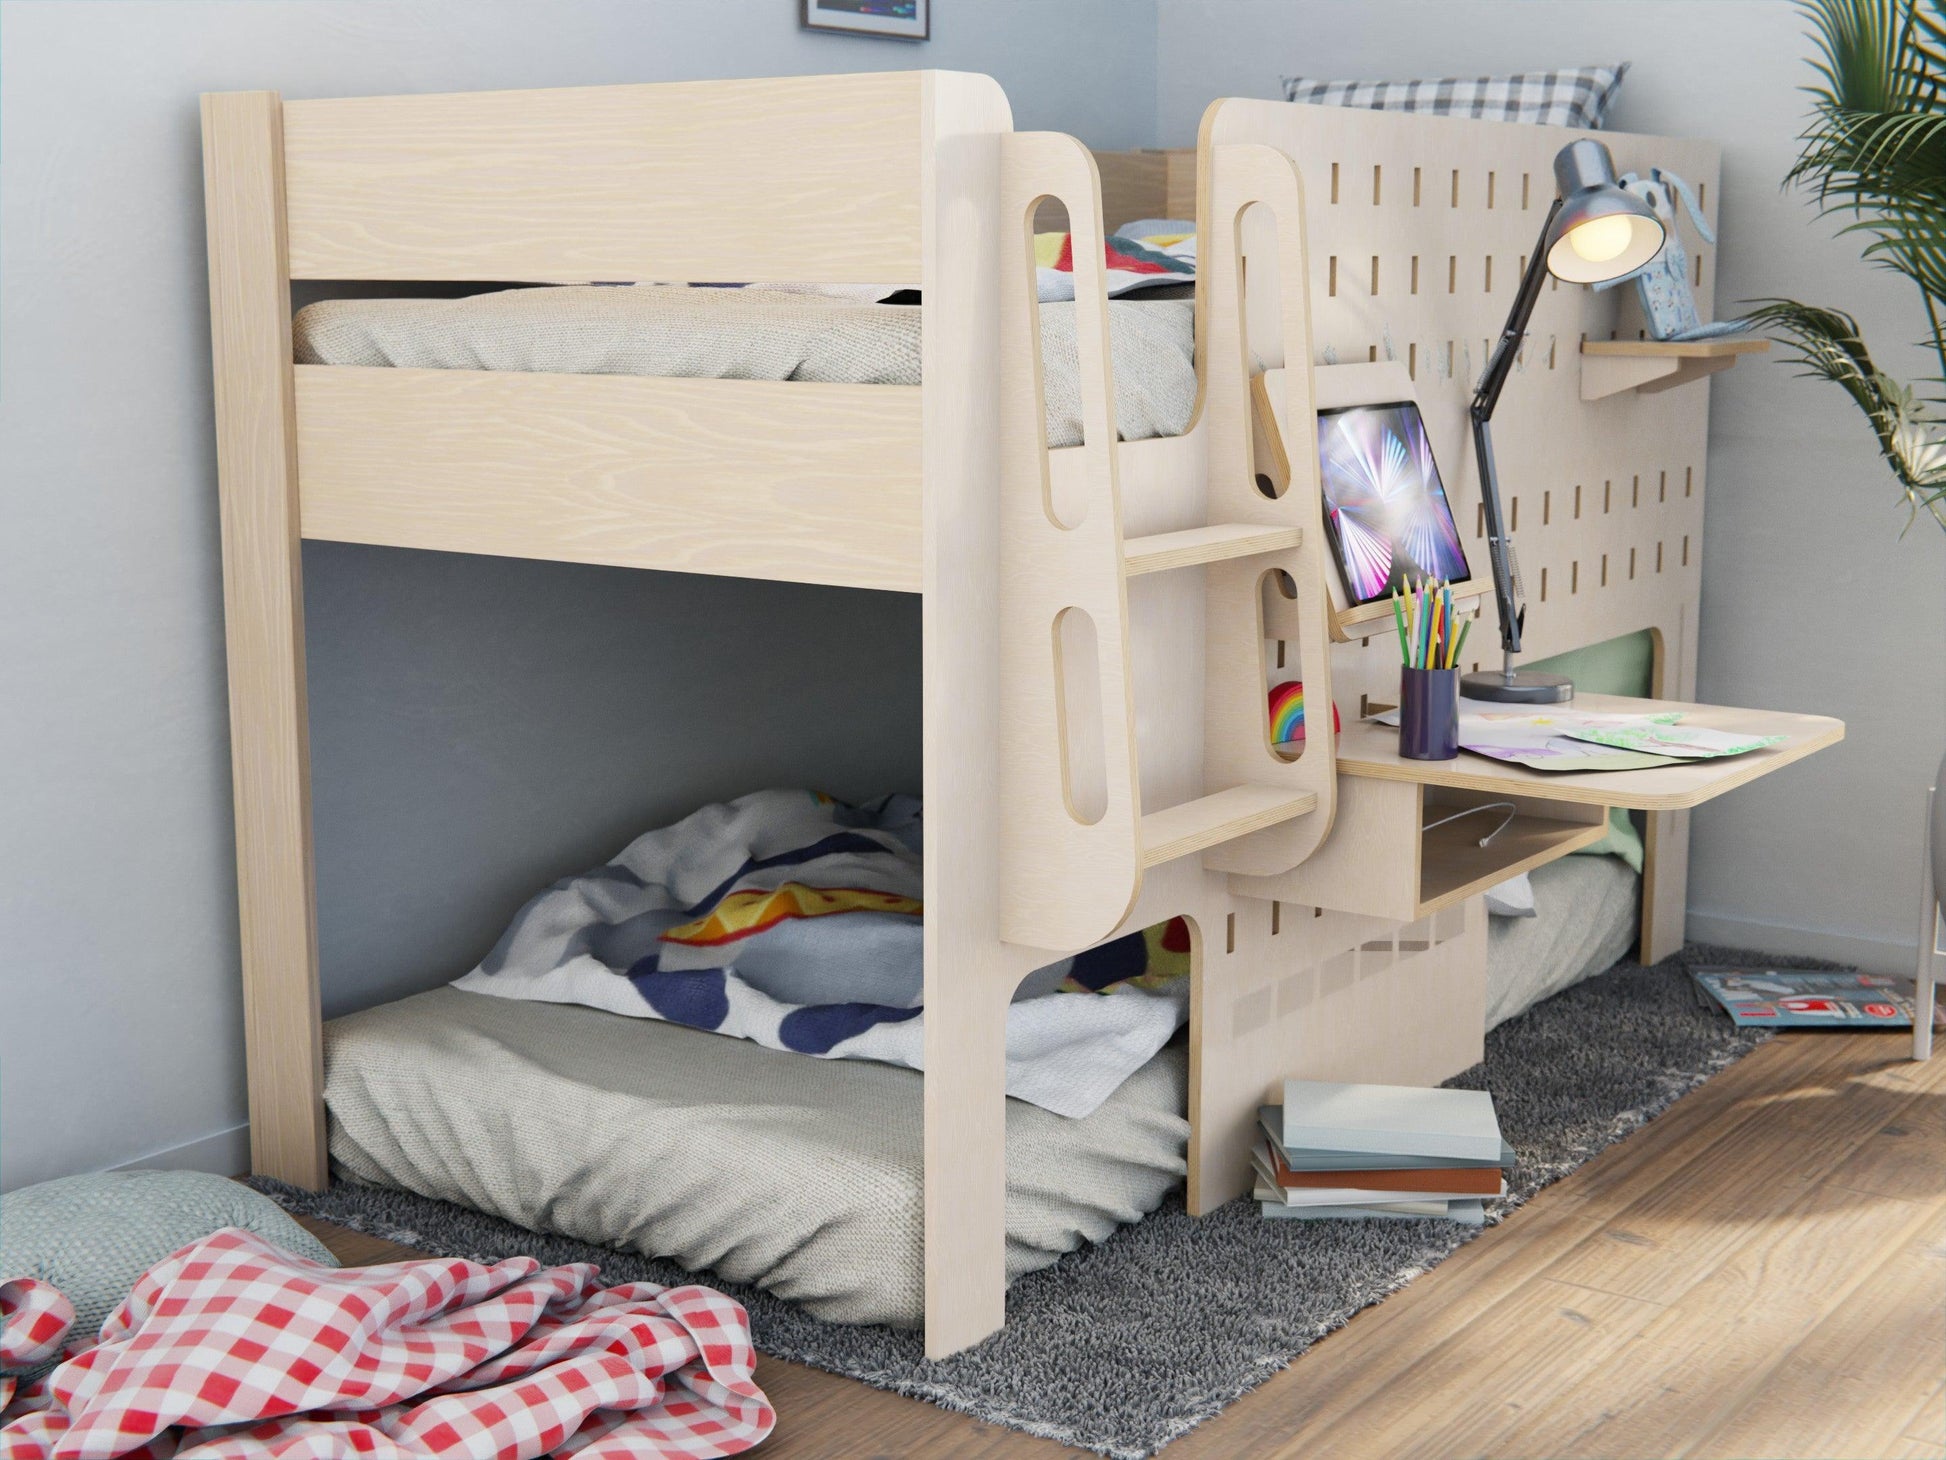 Invest in your child's dreams and education with our ergonomically designed wooden low loft bed that sports a convenient study table.